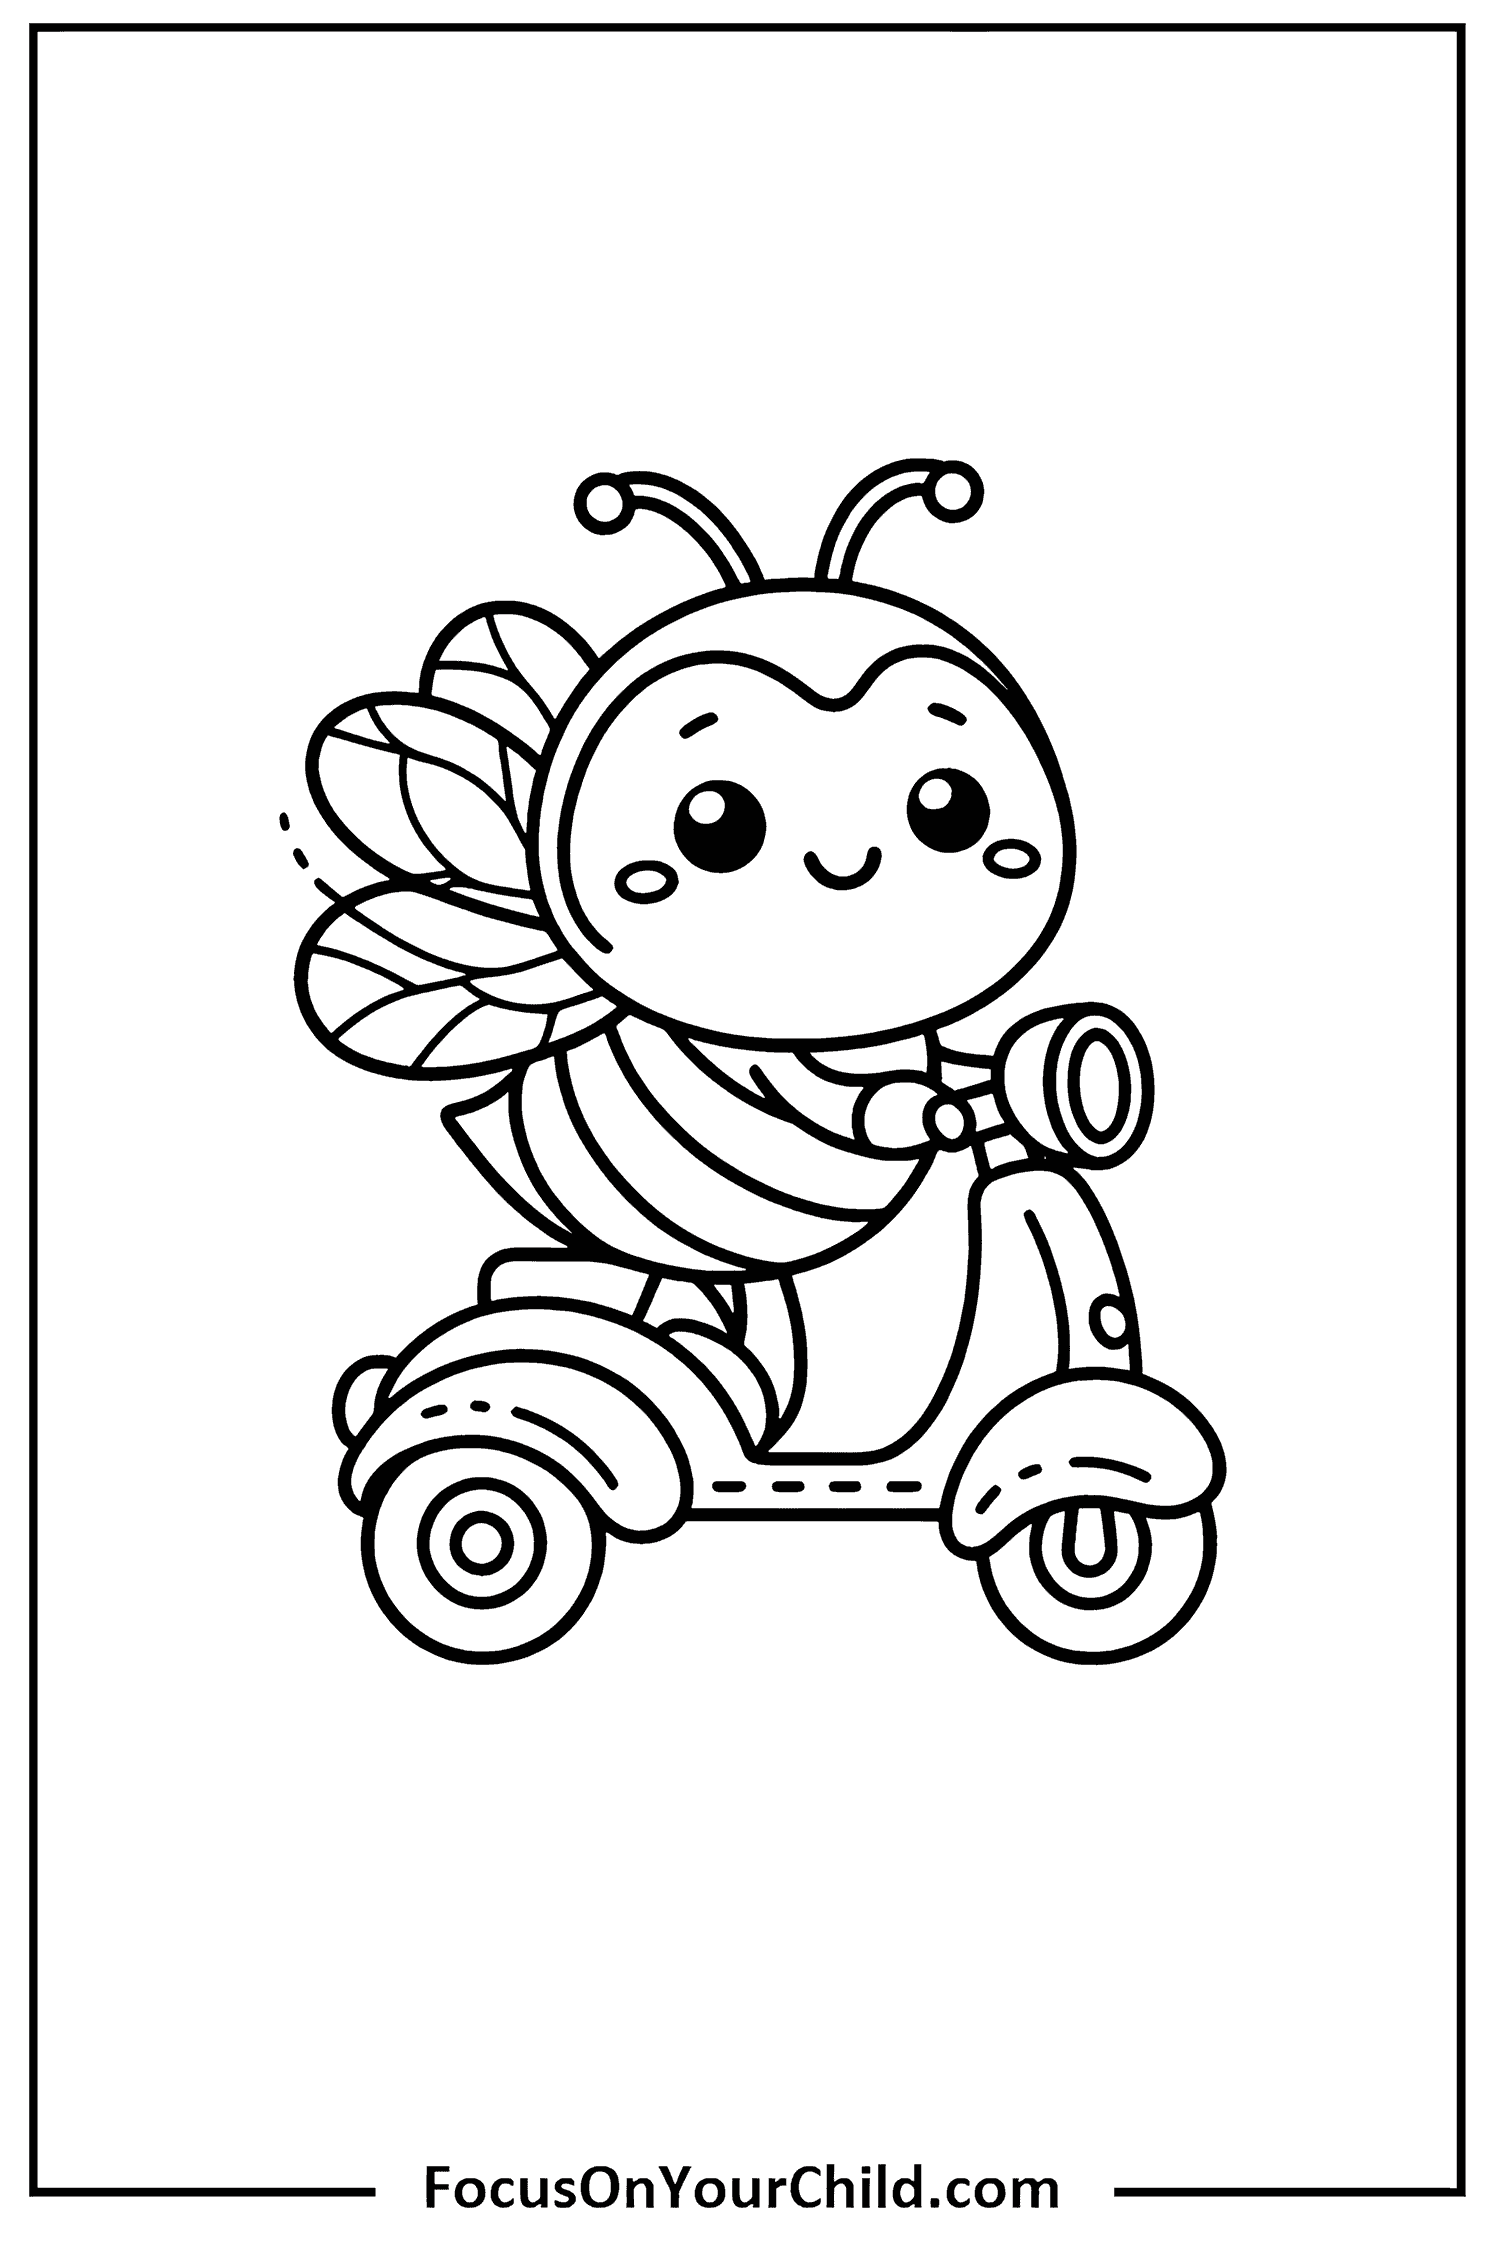 Whimsical bee character riding a scooter in a childrens coloring book.